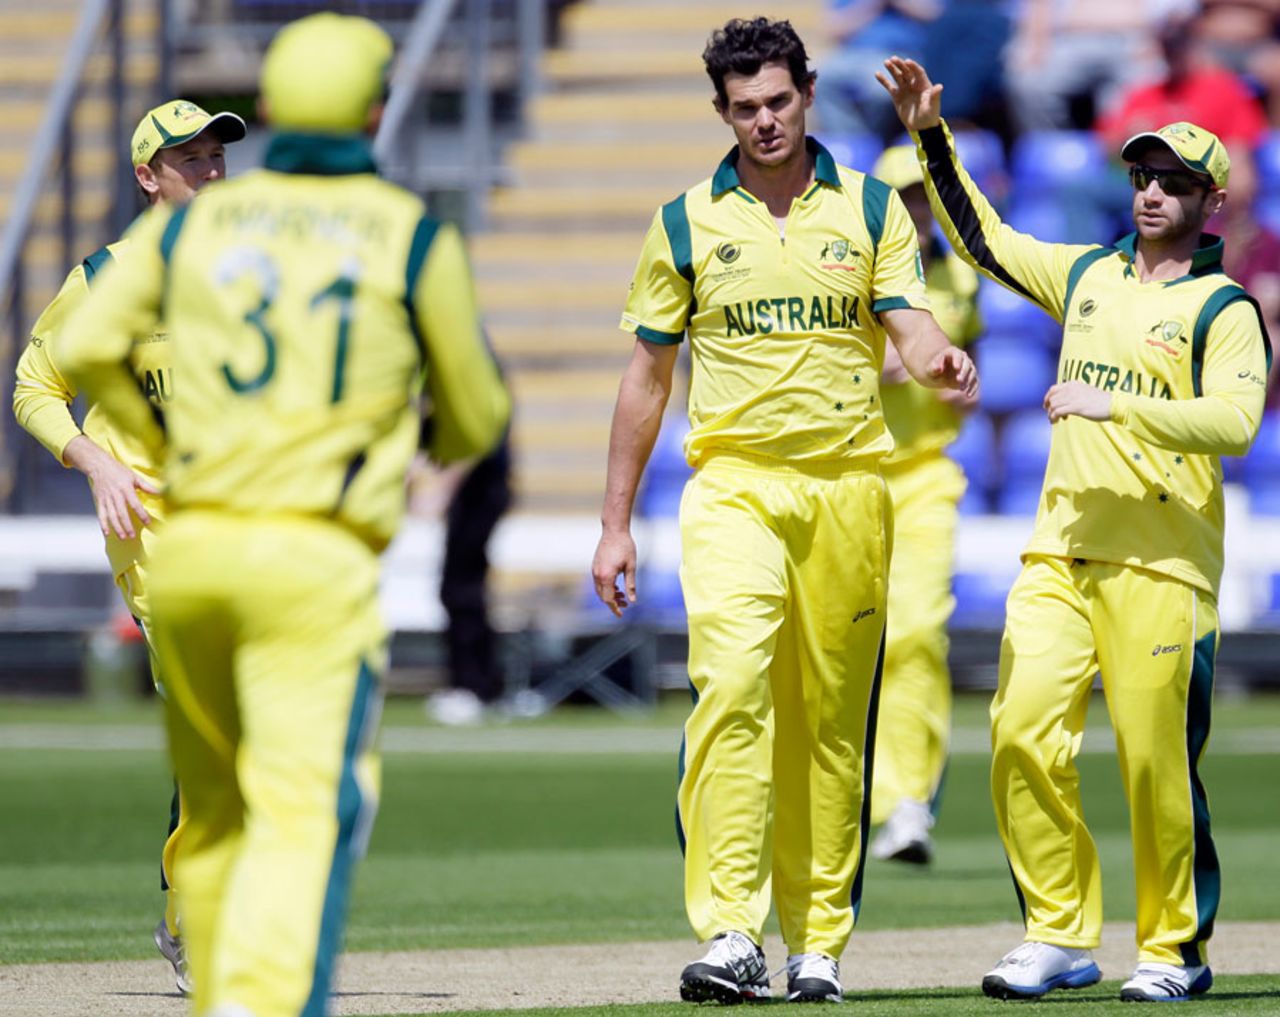 Clint McKay celebrates a wicket with his team mates, Australia v West Indies, Champions Trophy 2013 warm-up match, Cardiff, June 1